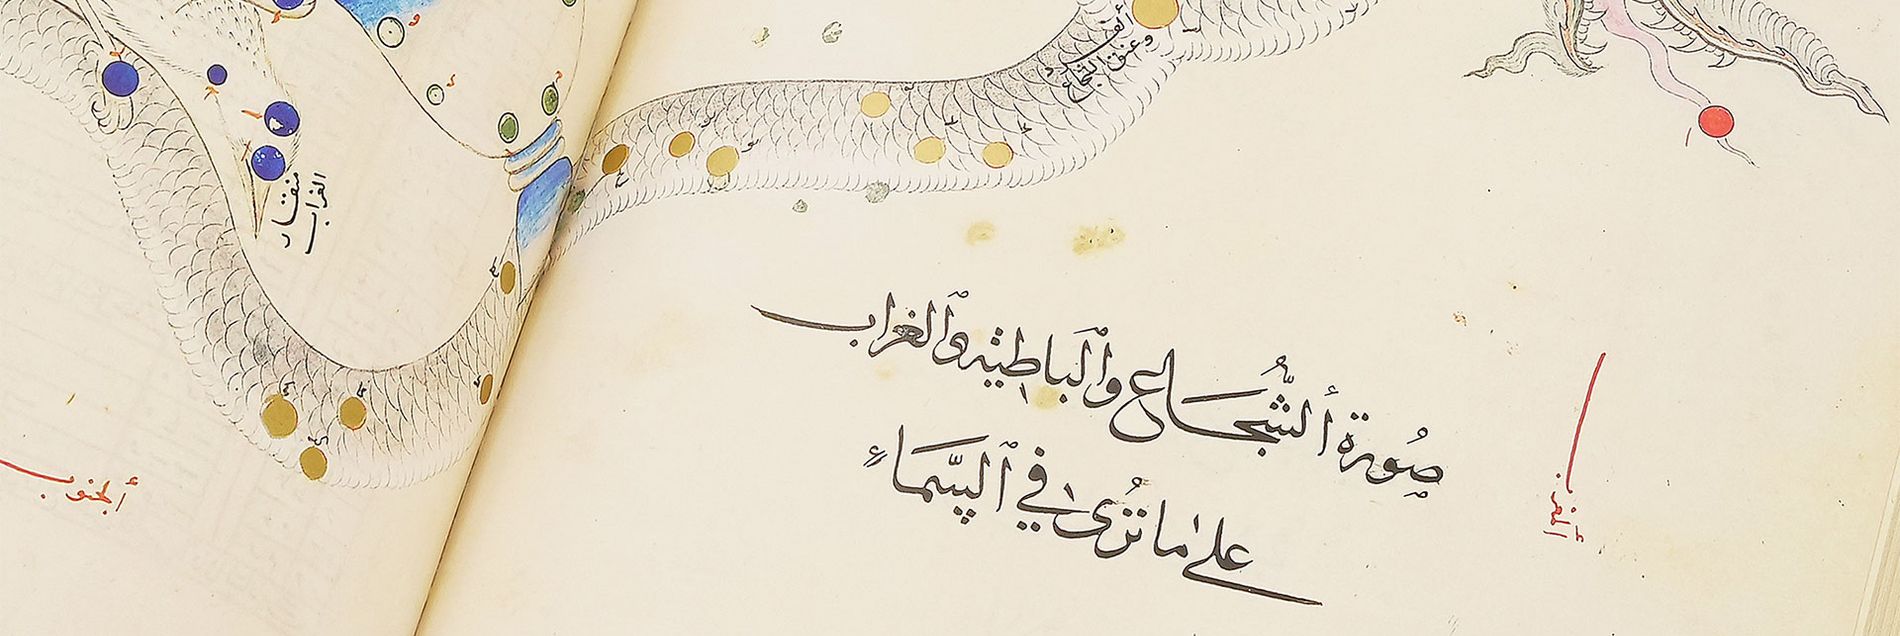 <i>“Golden stars and mythical figures for the Prince of Samarkand”</i>